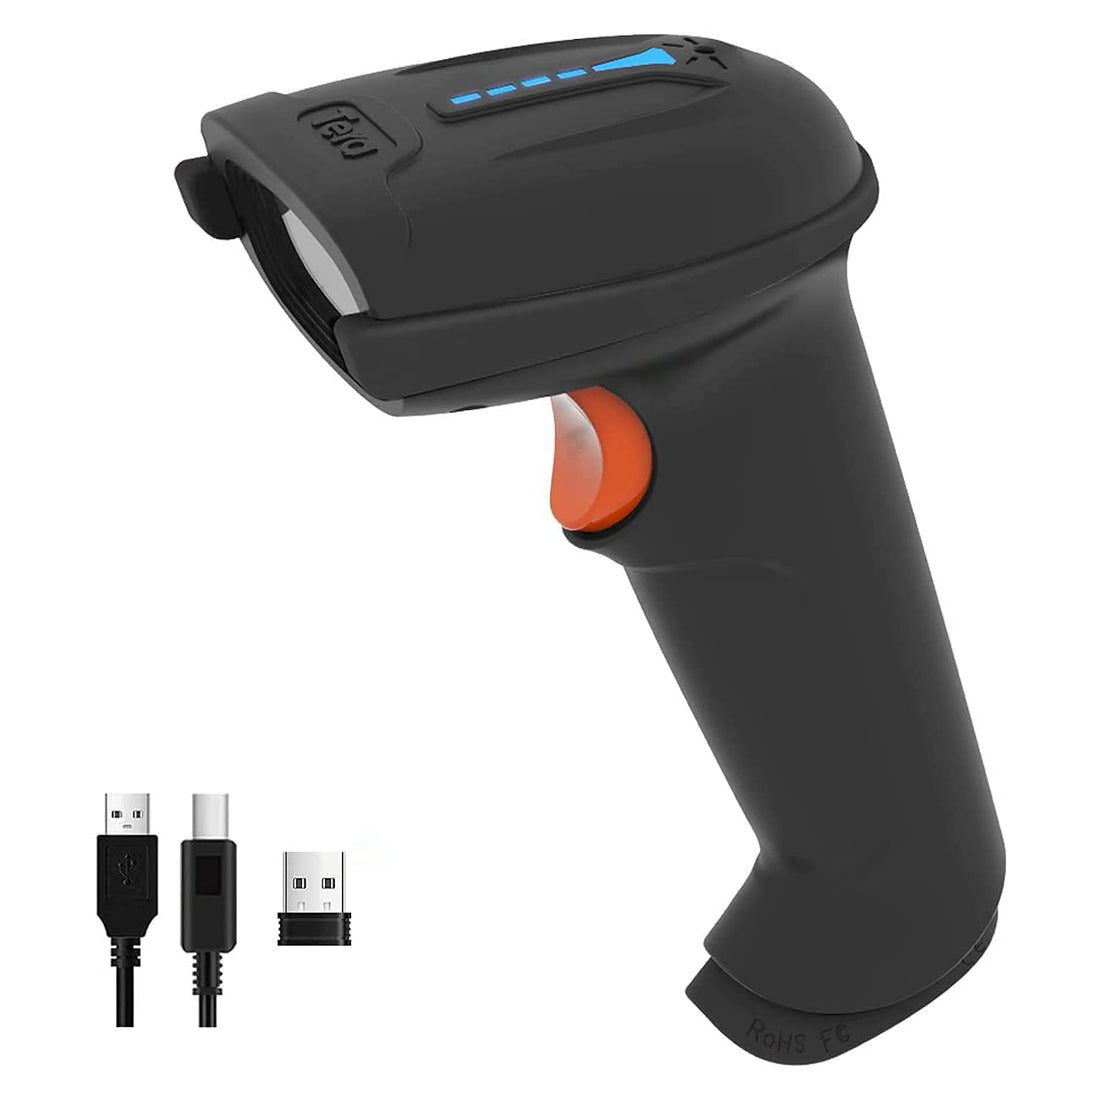 Tera Barcode Scanner Wireless Versatile 2-in-1 (2.4Ghz Wireless+USB 2.0 Wired) with Battery Level Indicator 328 Feet Transmission Distance Rechargeable 1D Laser Bar Code Reader Handheld 5100 (Black)